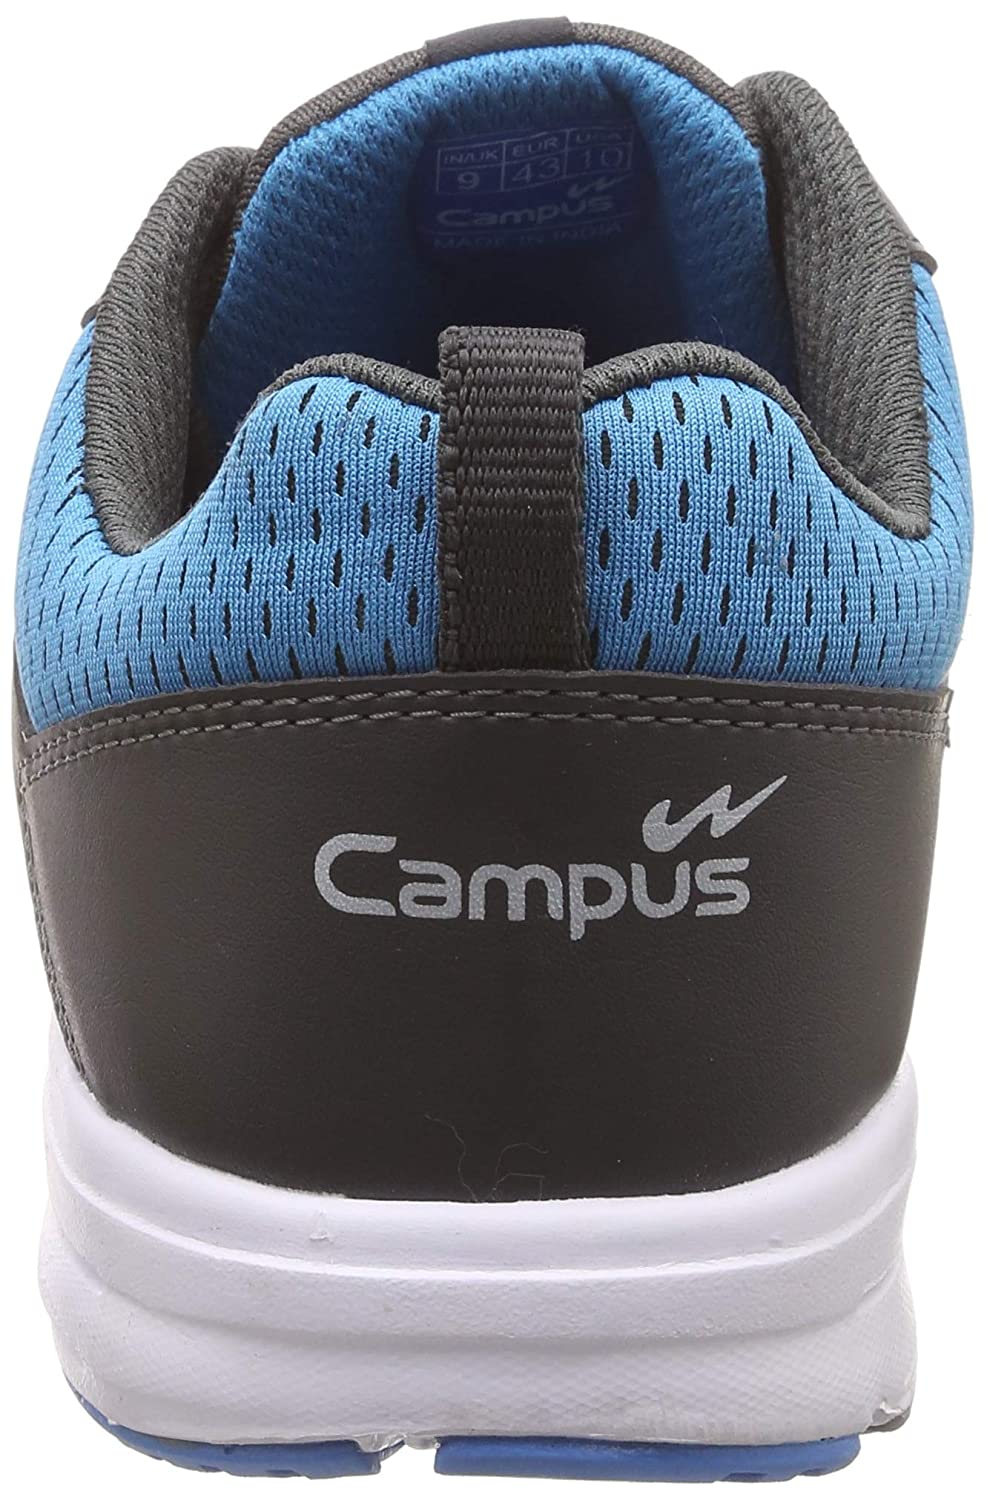 campus continent shoes price